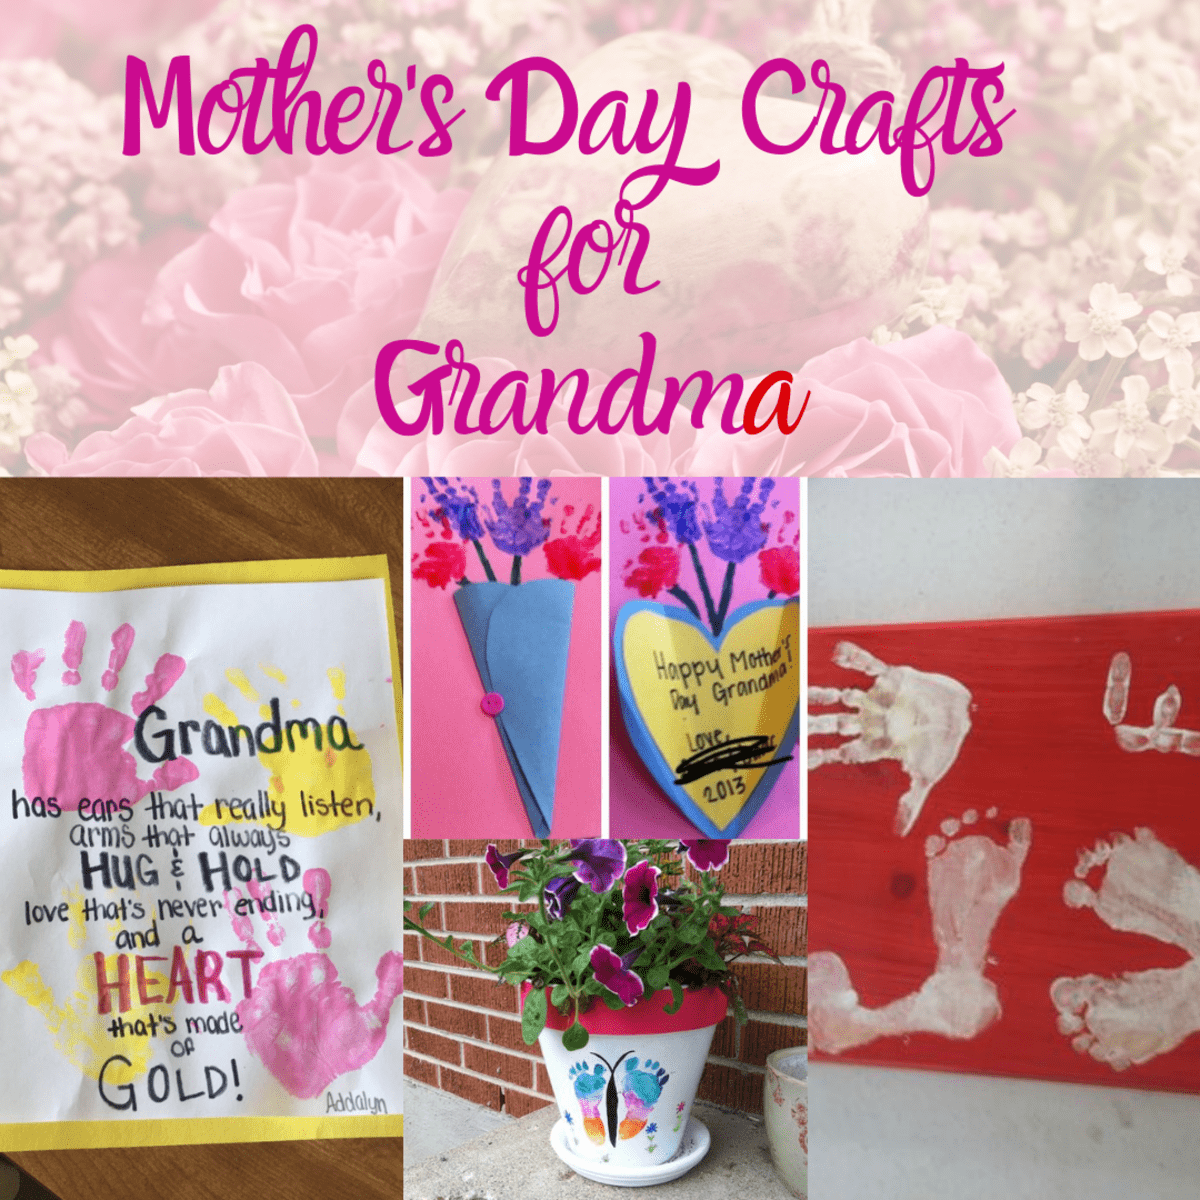 10 Handmade Mother's Day Gift Ideas for Moms and Grandmas!